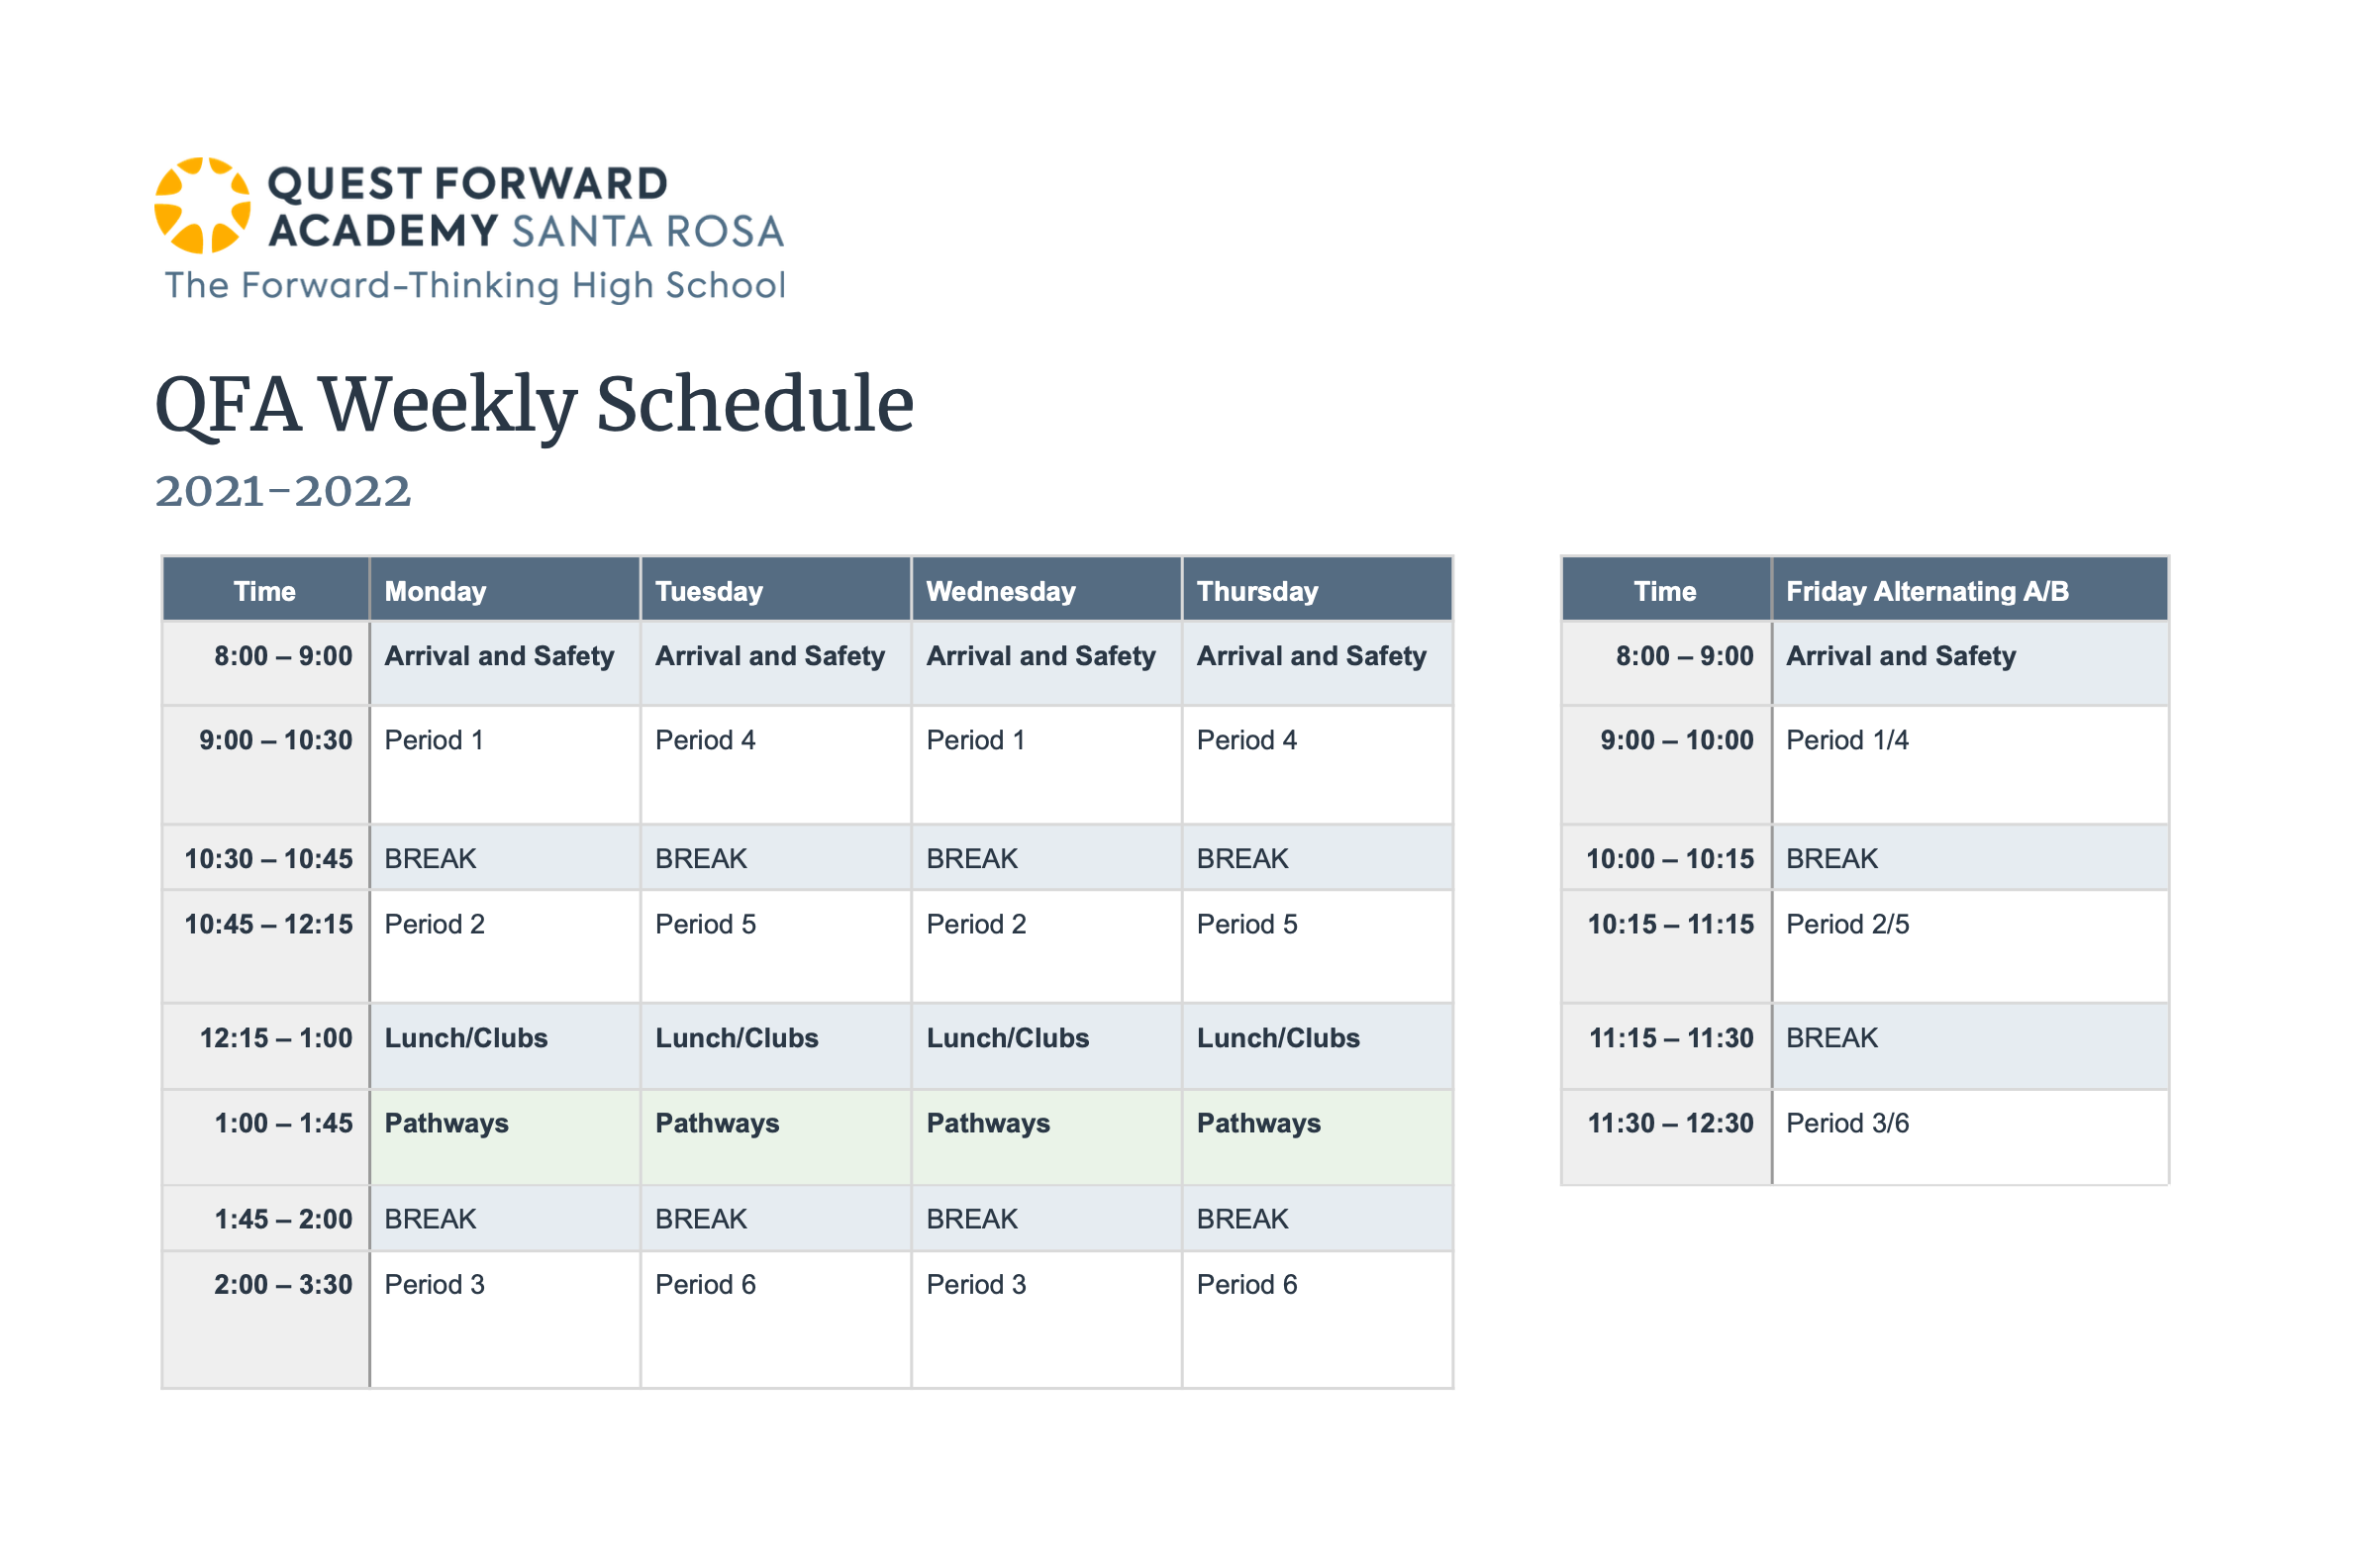 Weekly class schedule for Quest Forward Academy Santa Rosa